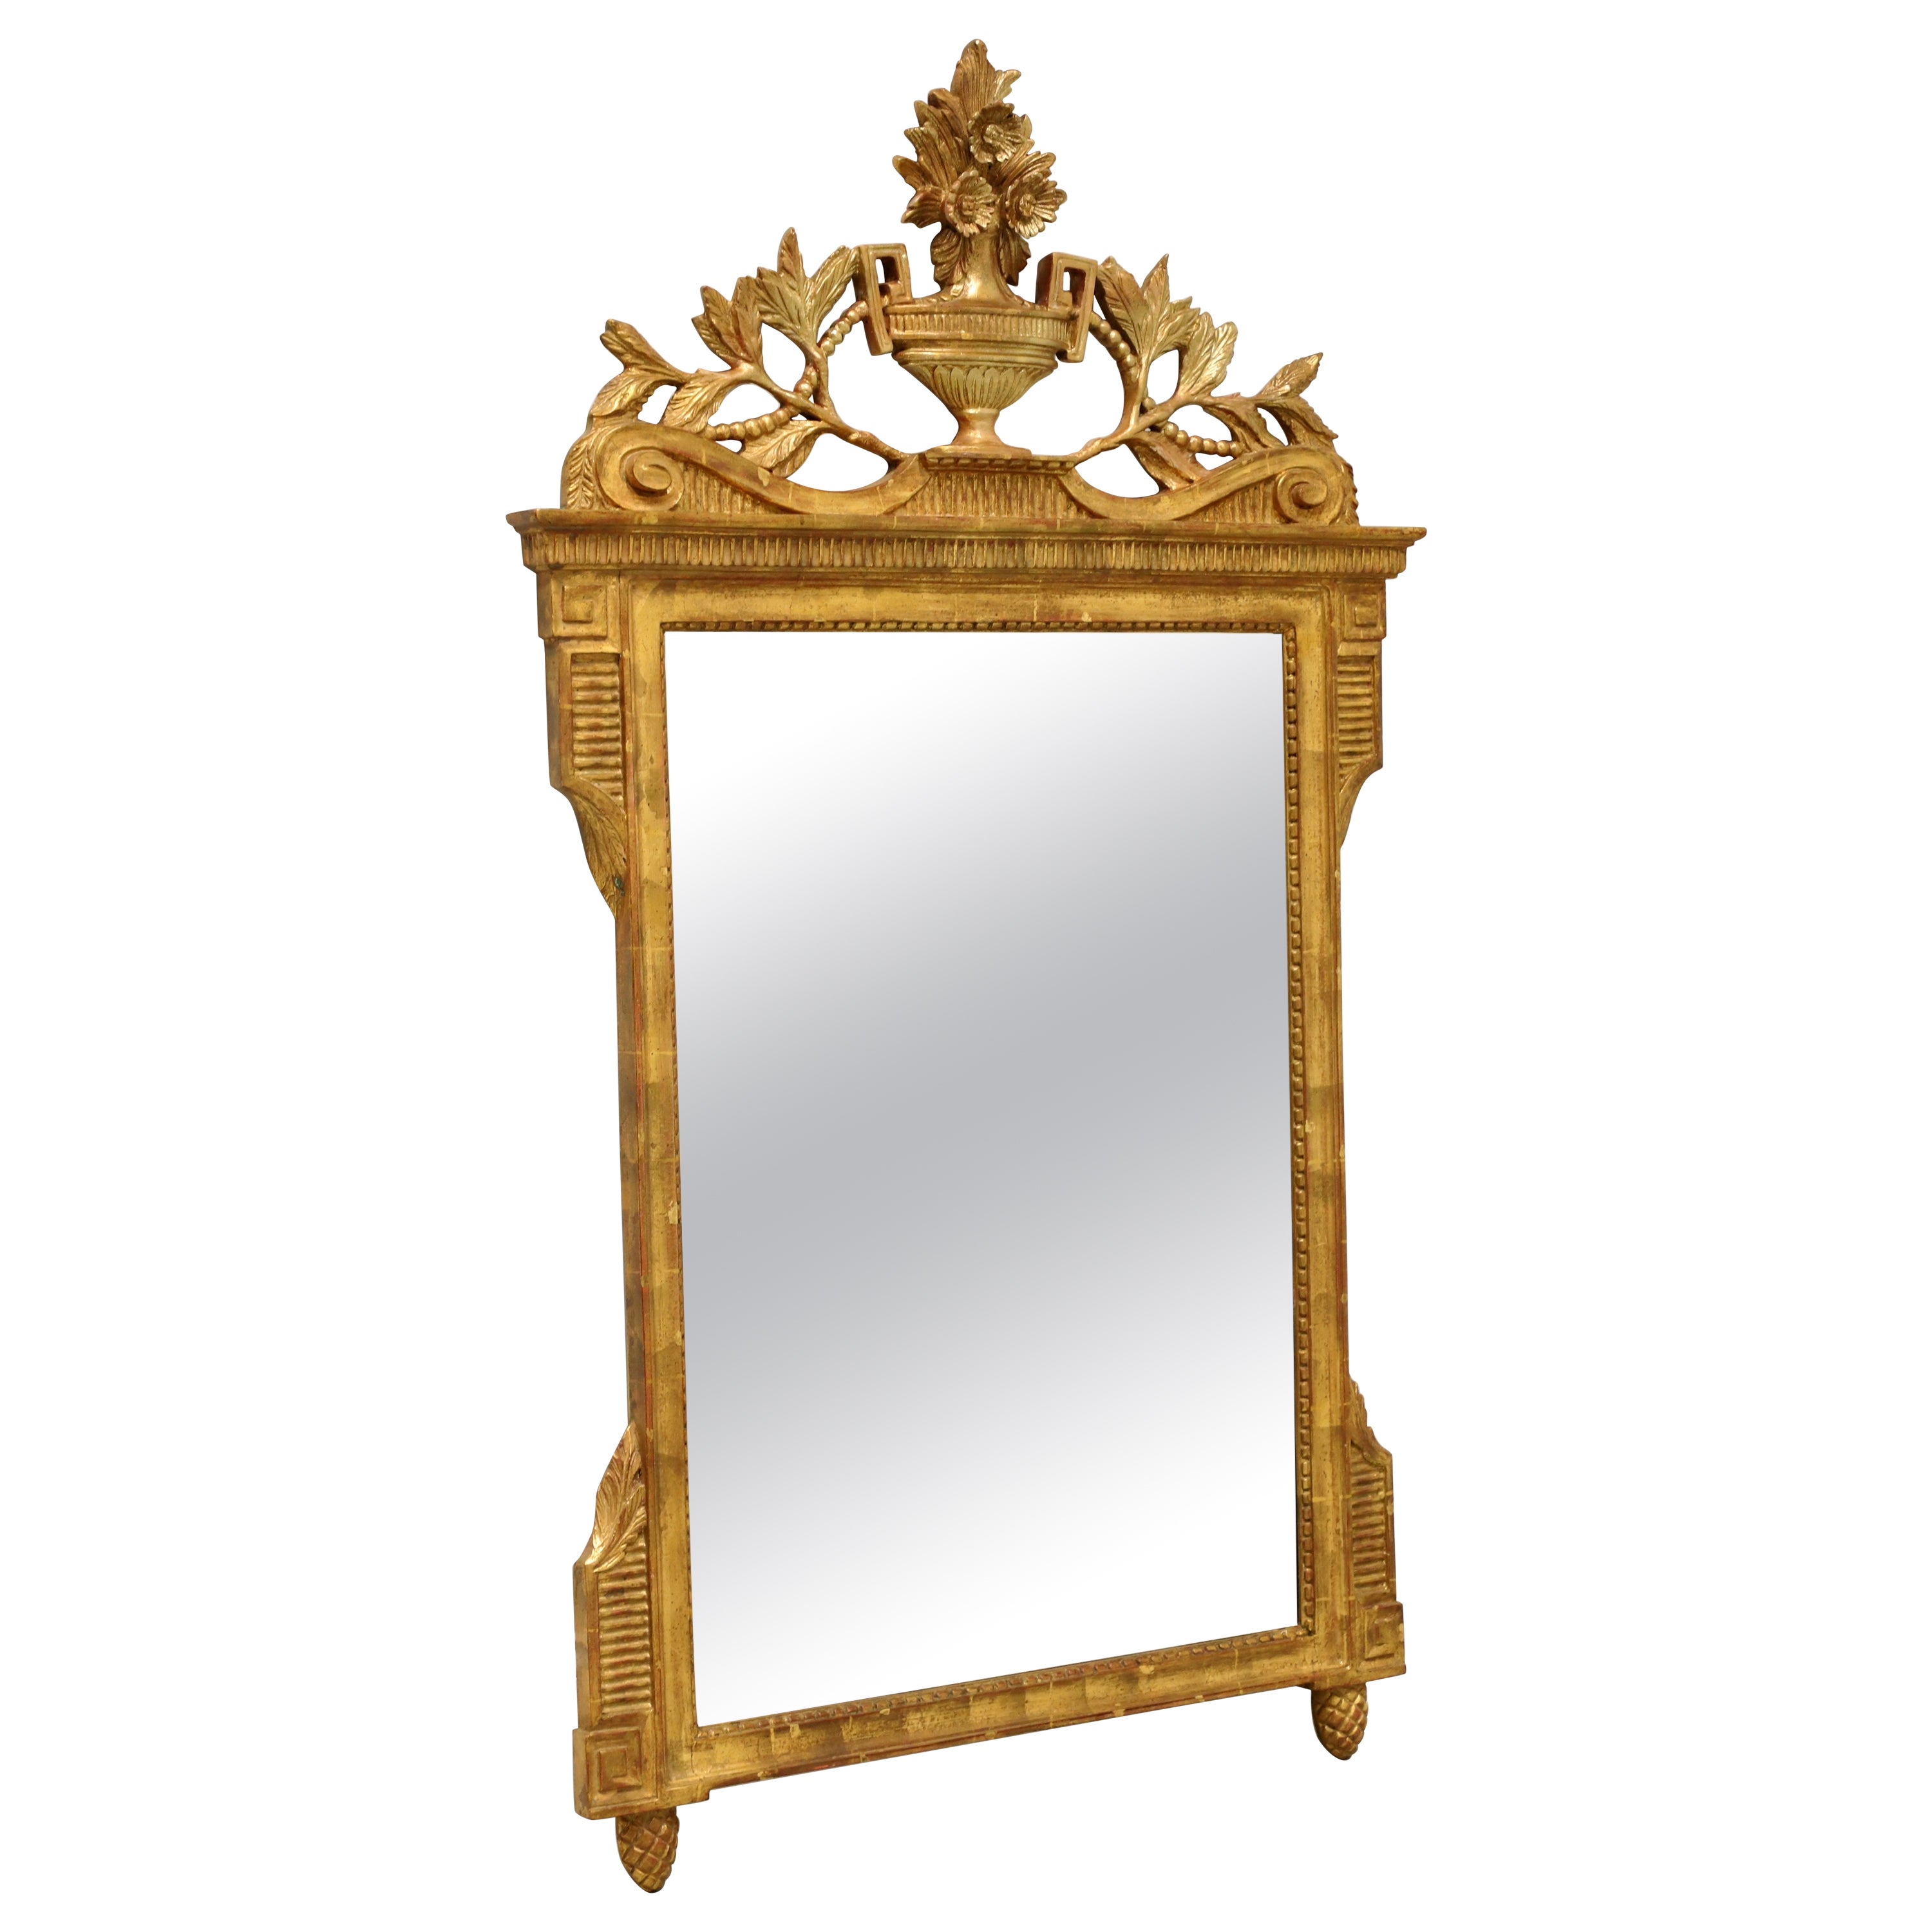 Mid 20th Century Gold Gilt Carved Neoclassical Style Beveled Wall Mirror